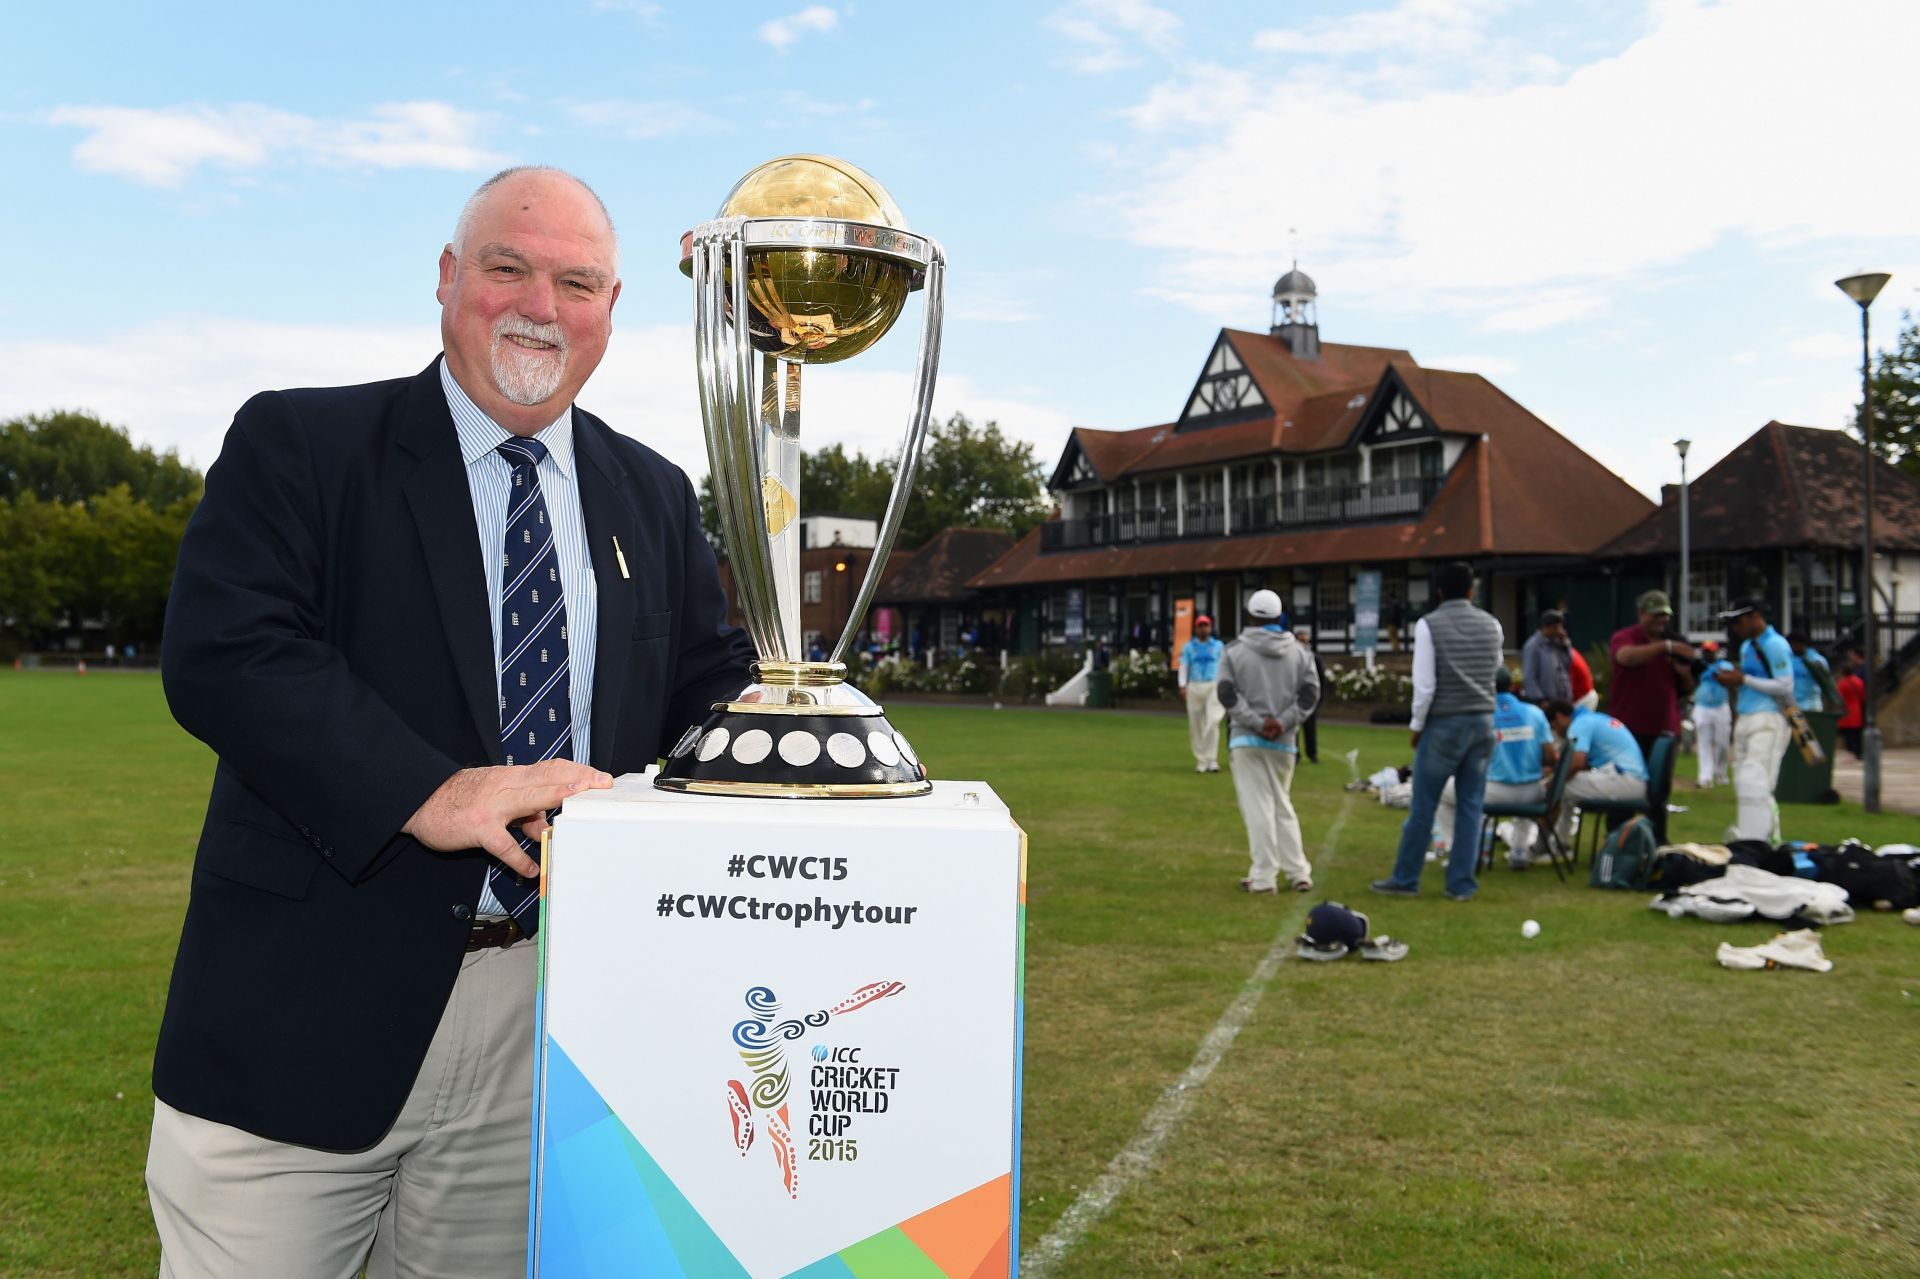 Mike Gatting was superb as England captain